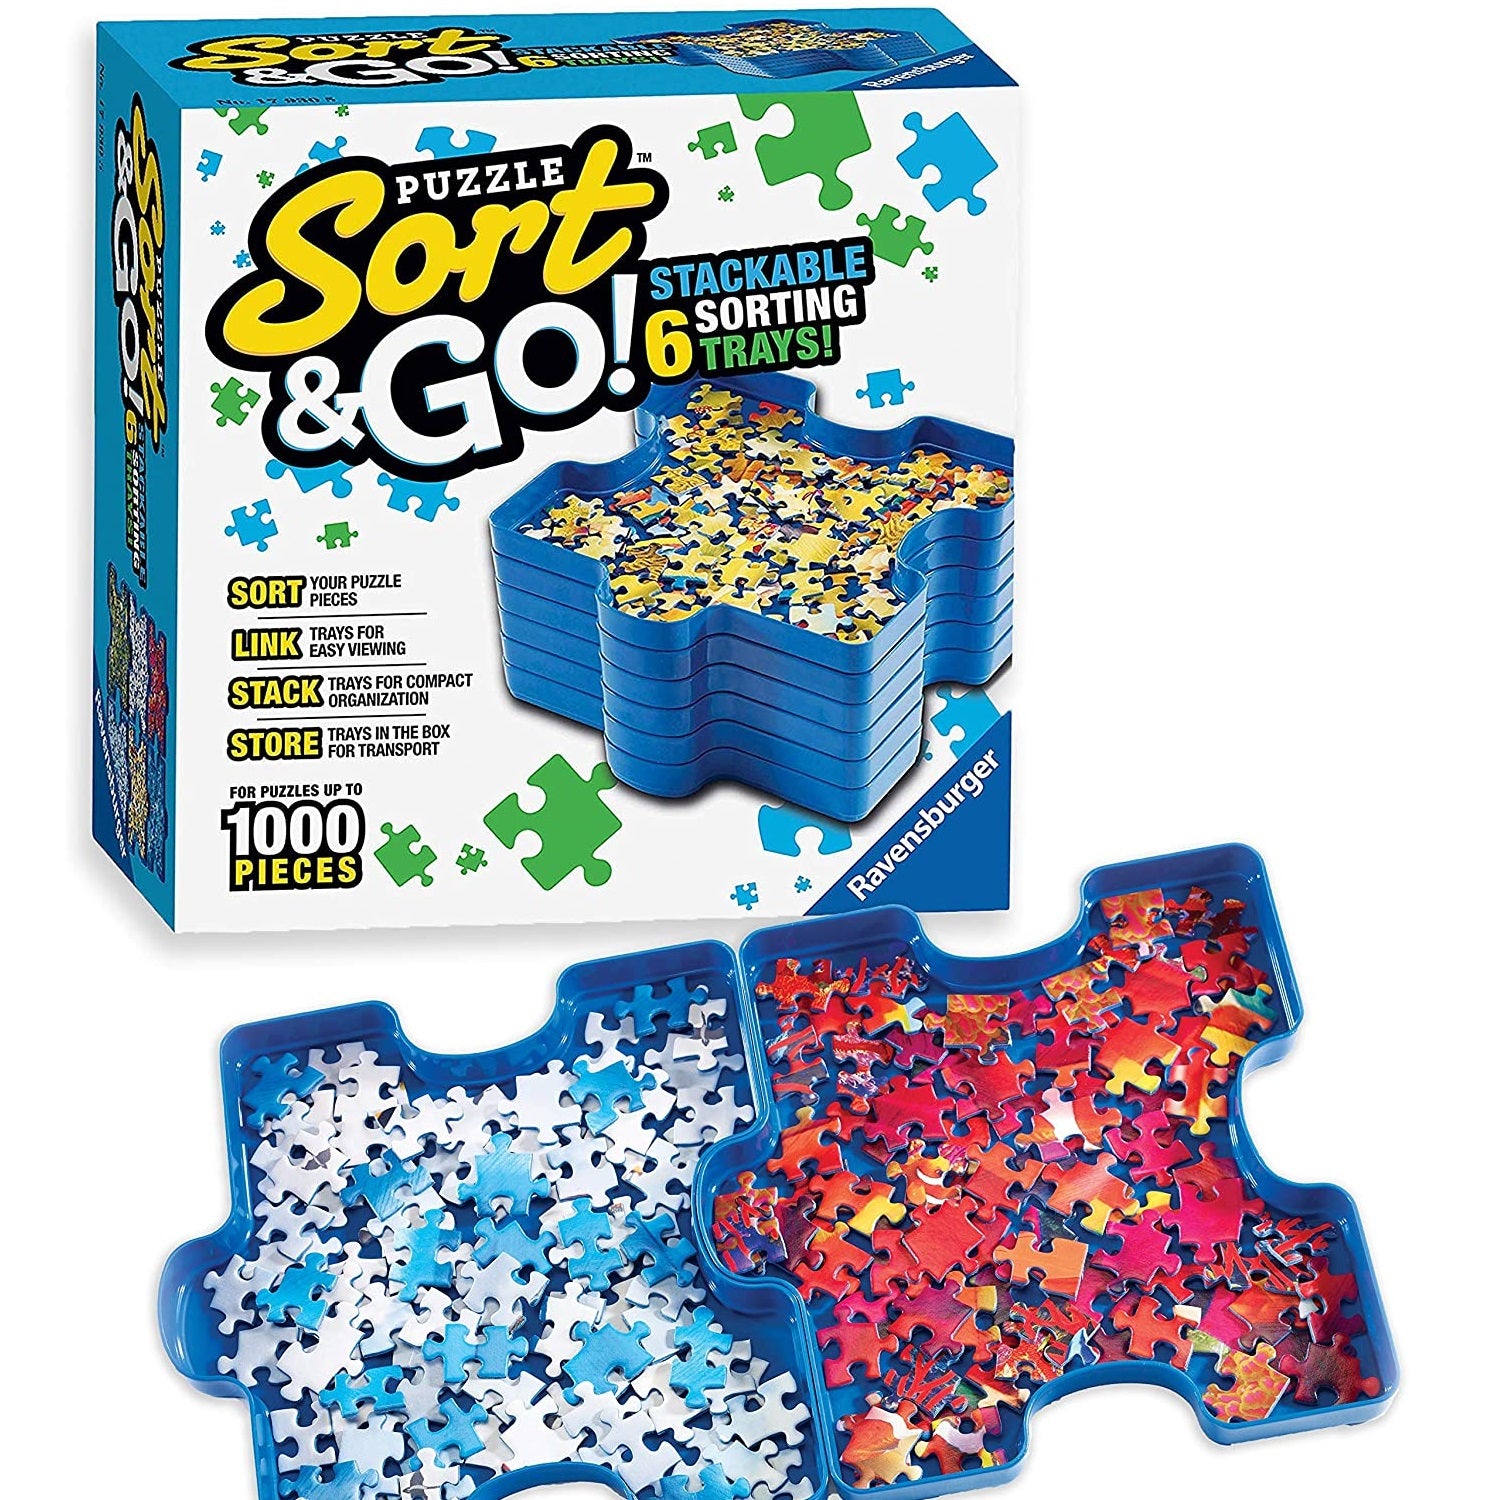 Ravensburger Puzzle Sort & Go Stackable Sorting Trays Hold 1000 Pieces NEW